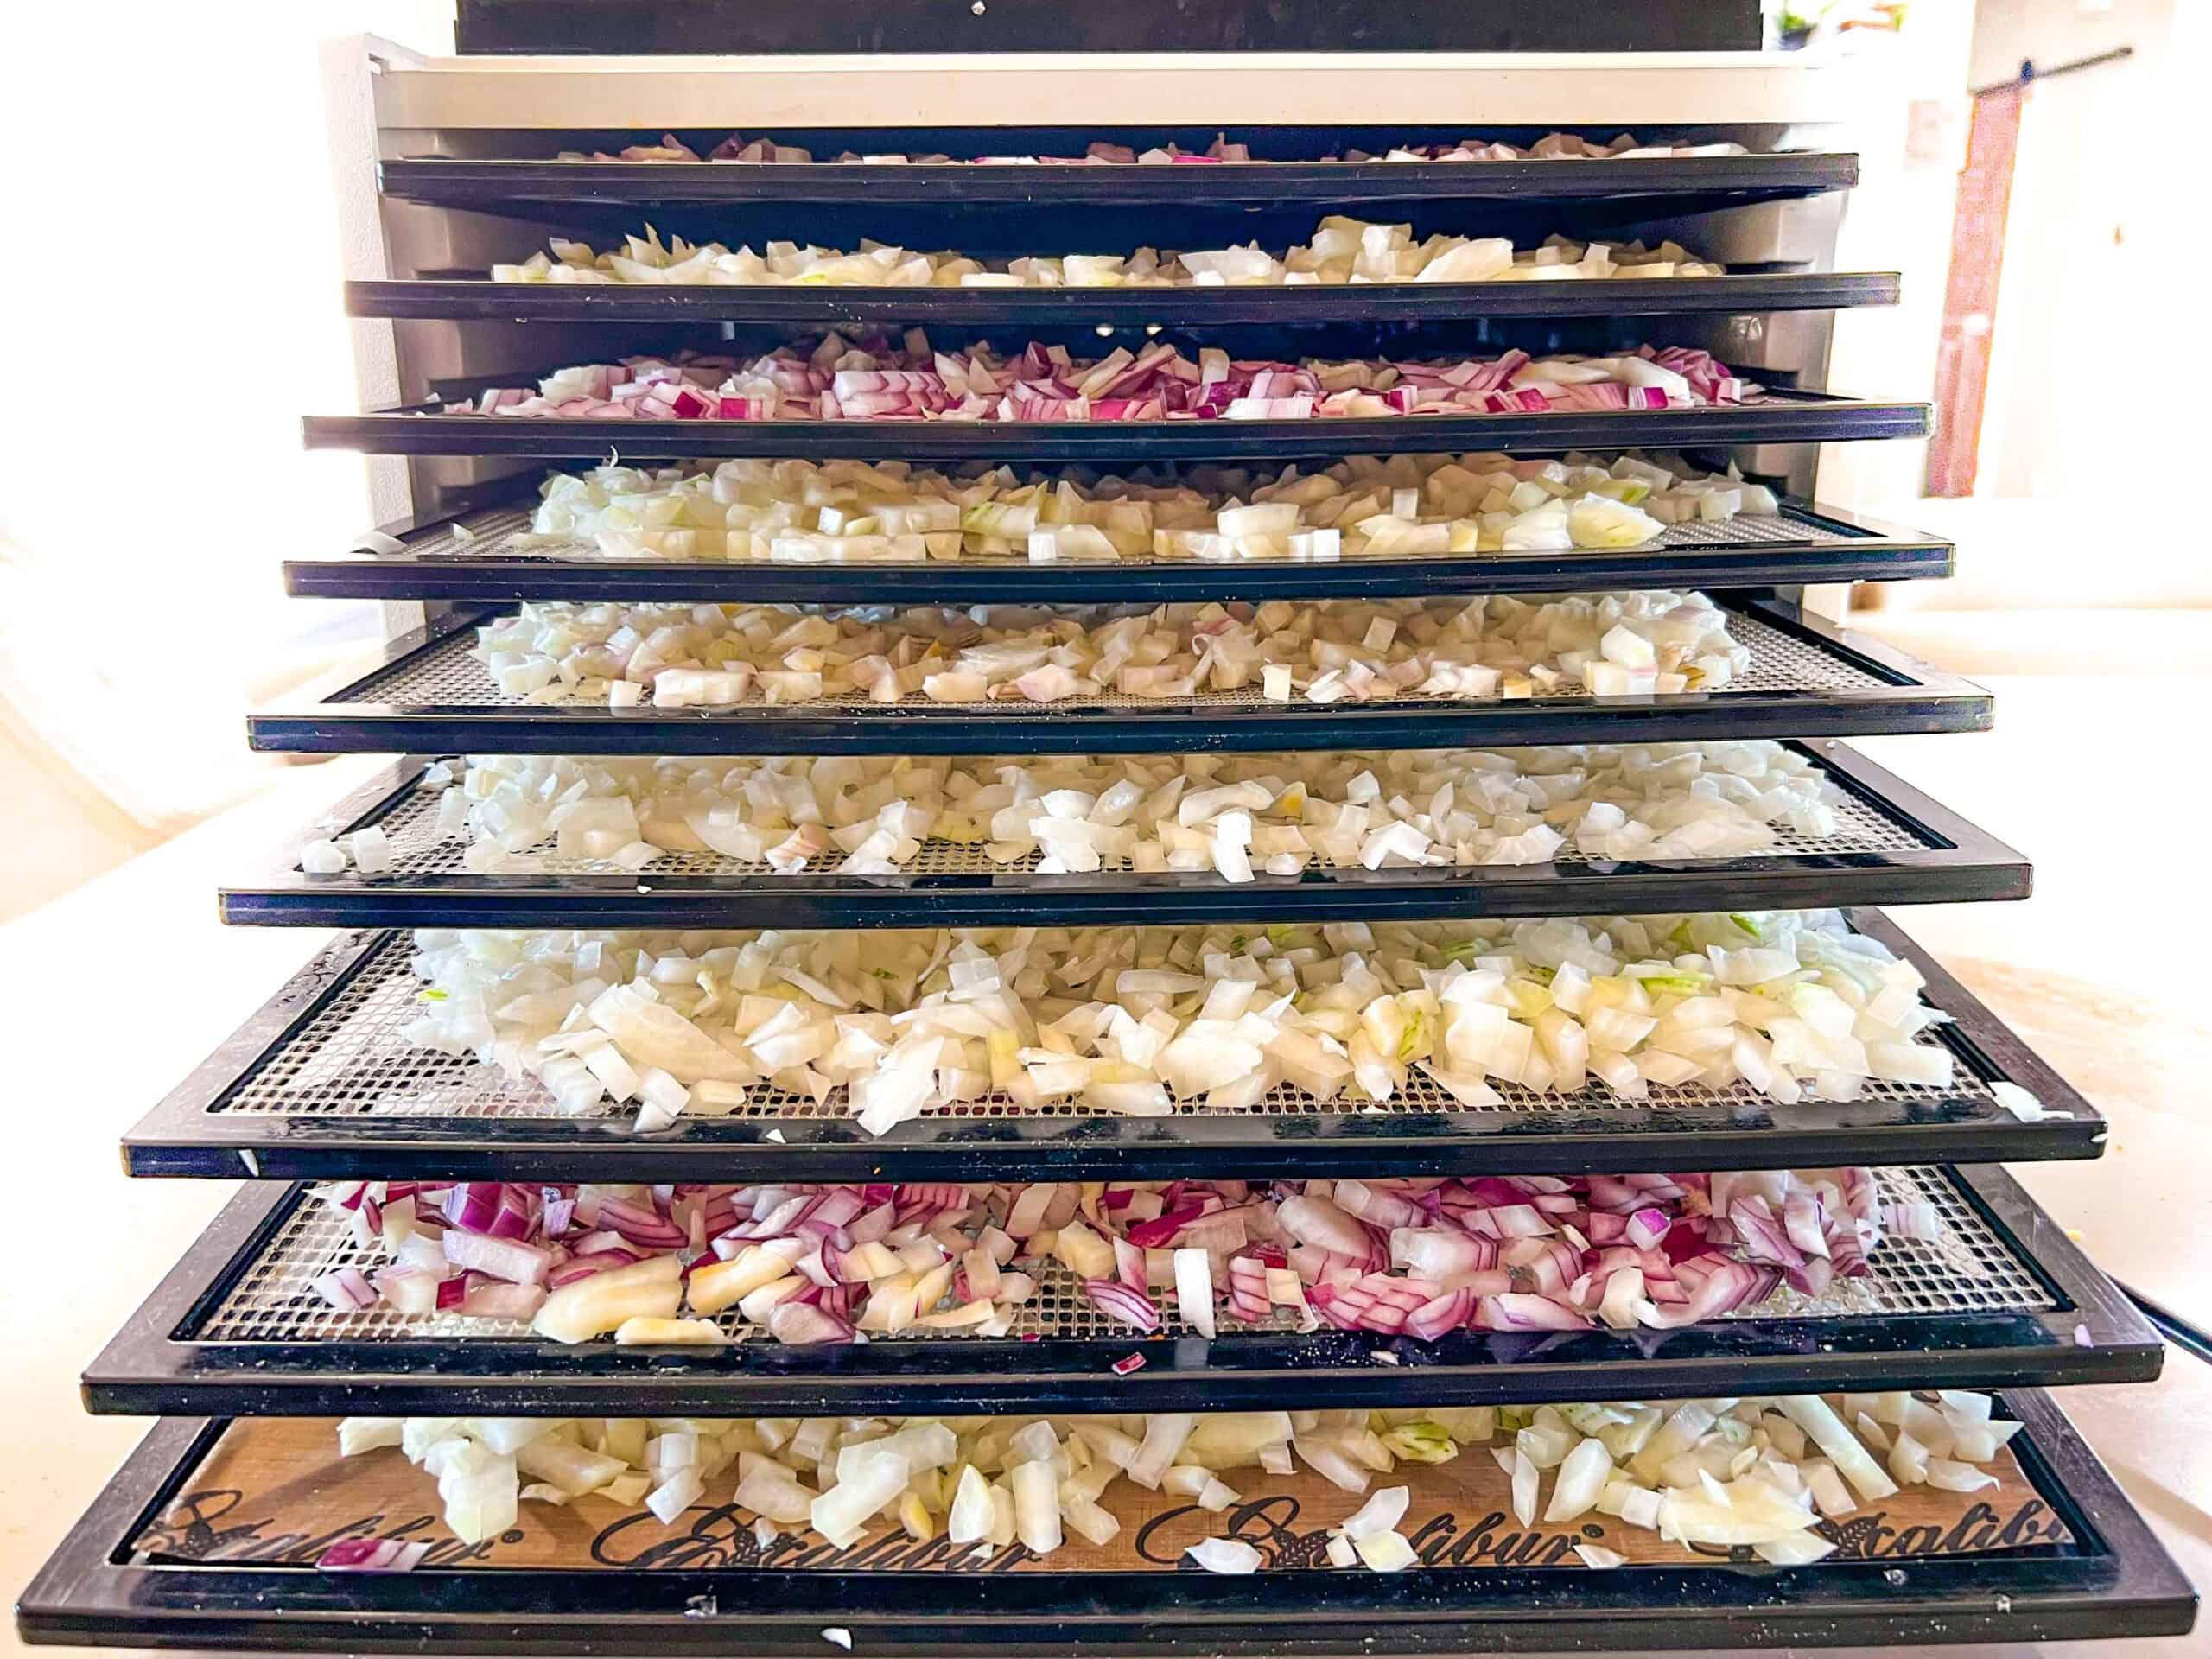 Diced onions in a 9 tray excalibur dehydrator.